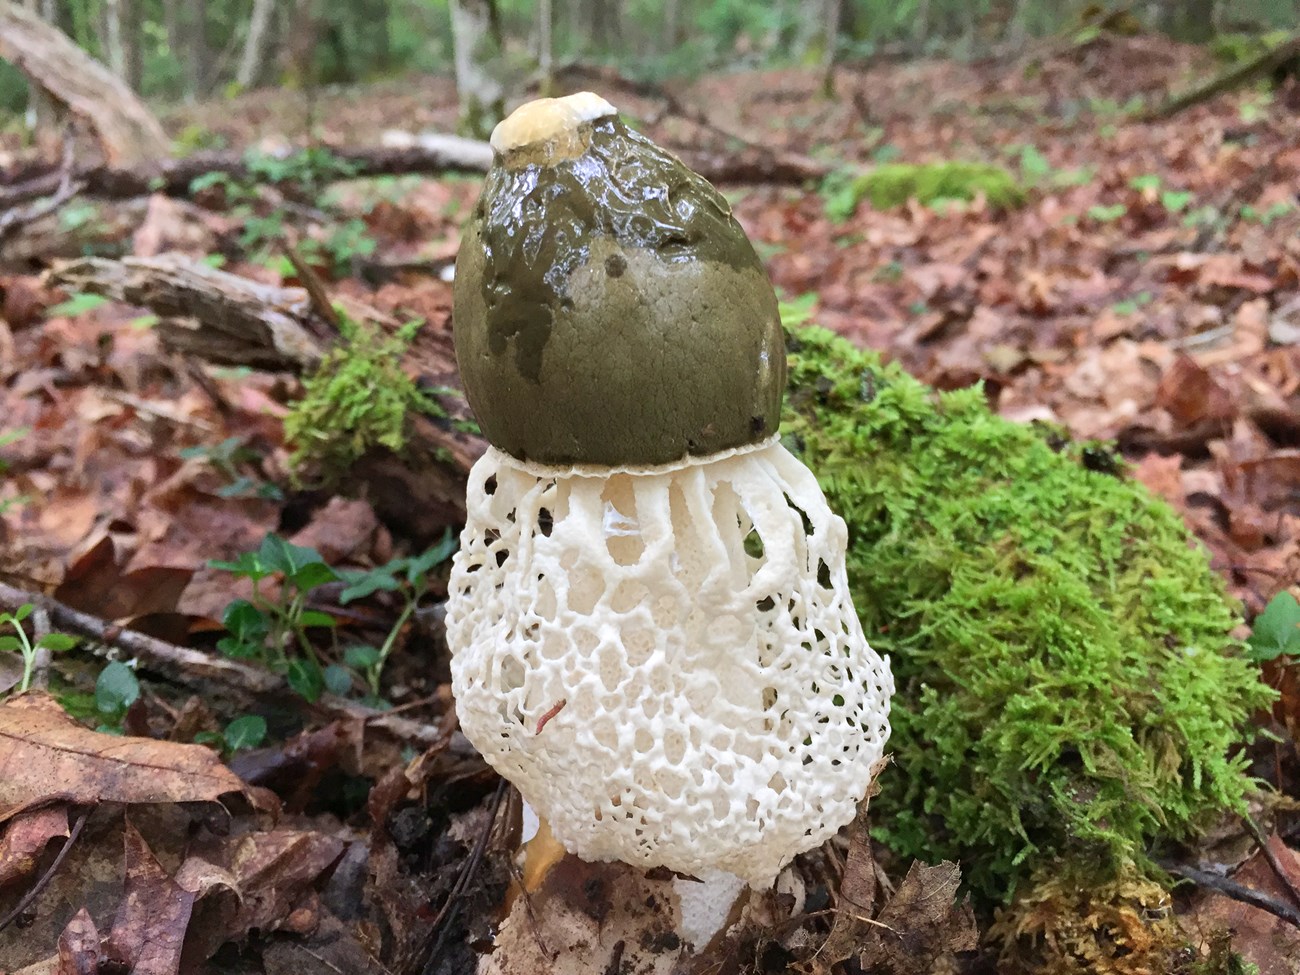 Mushroom with an intricate, white net extending down from an olive cap